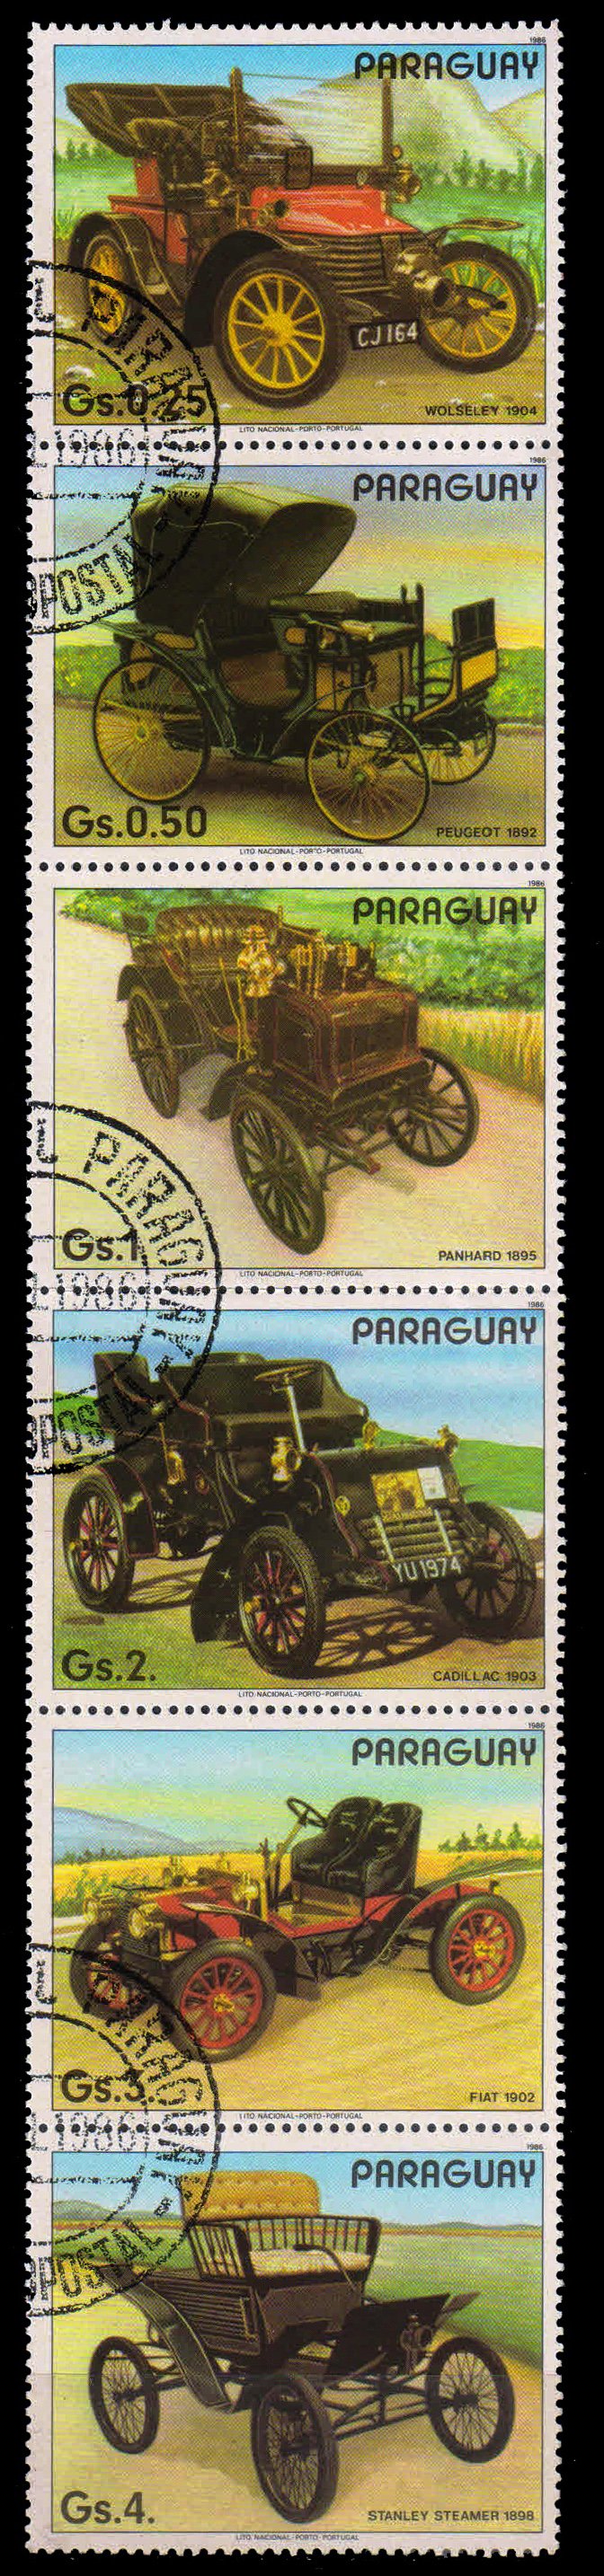 PARAGUAY 1983-Vintage Cars, Automobile-Set of 6-Used